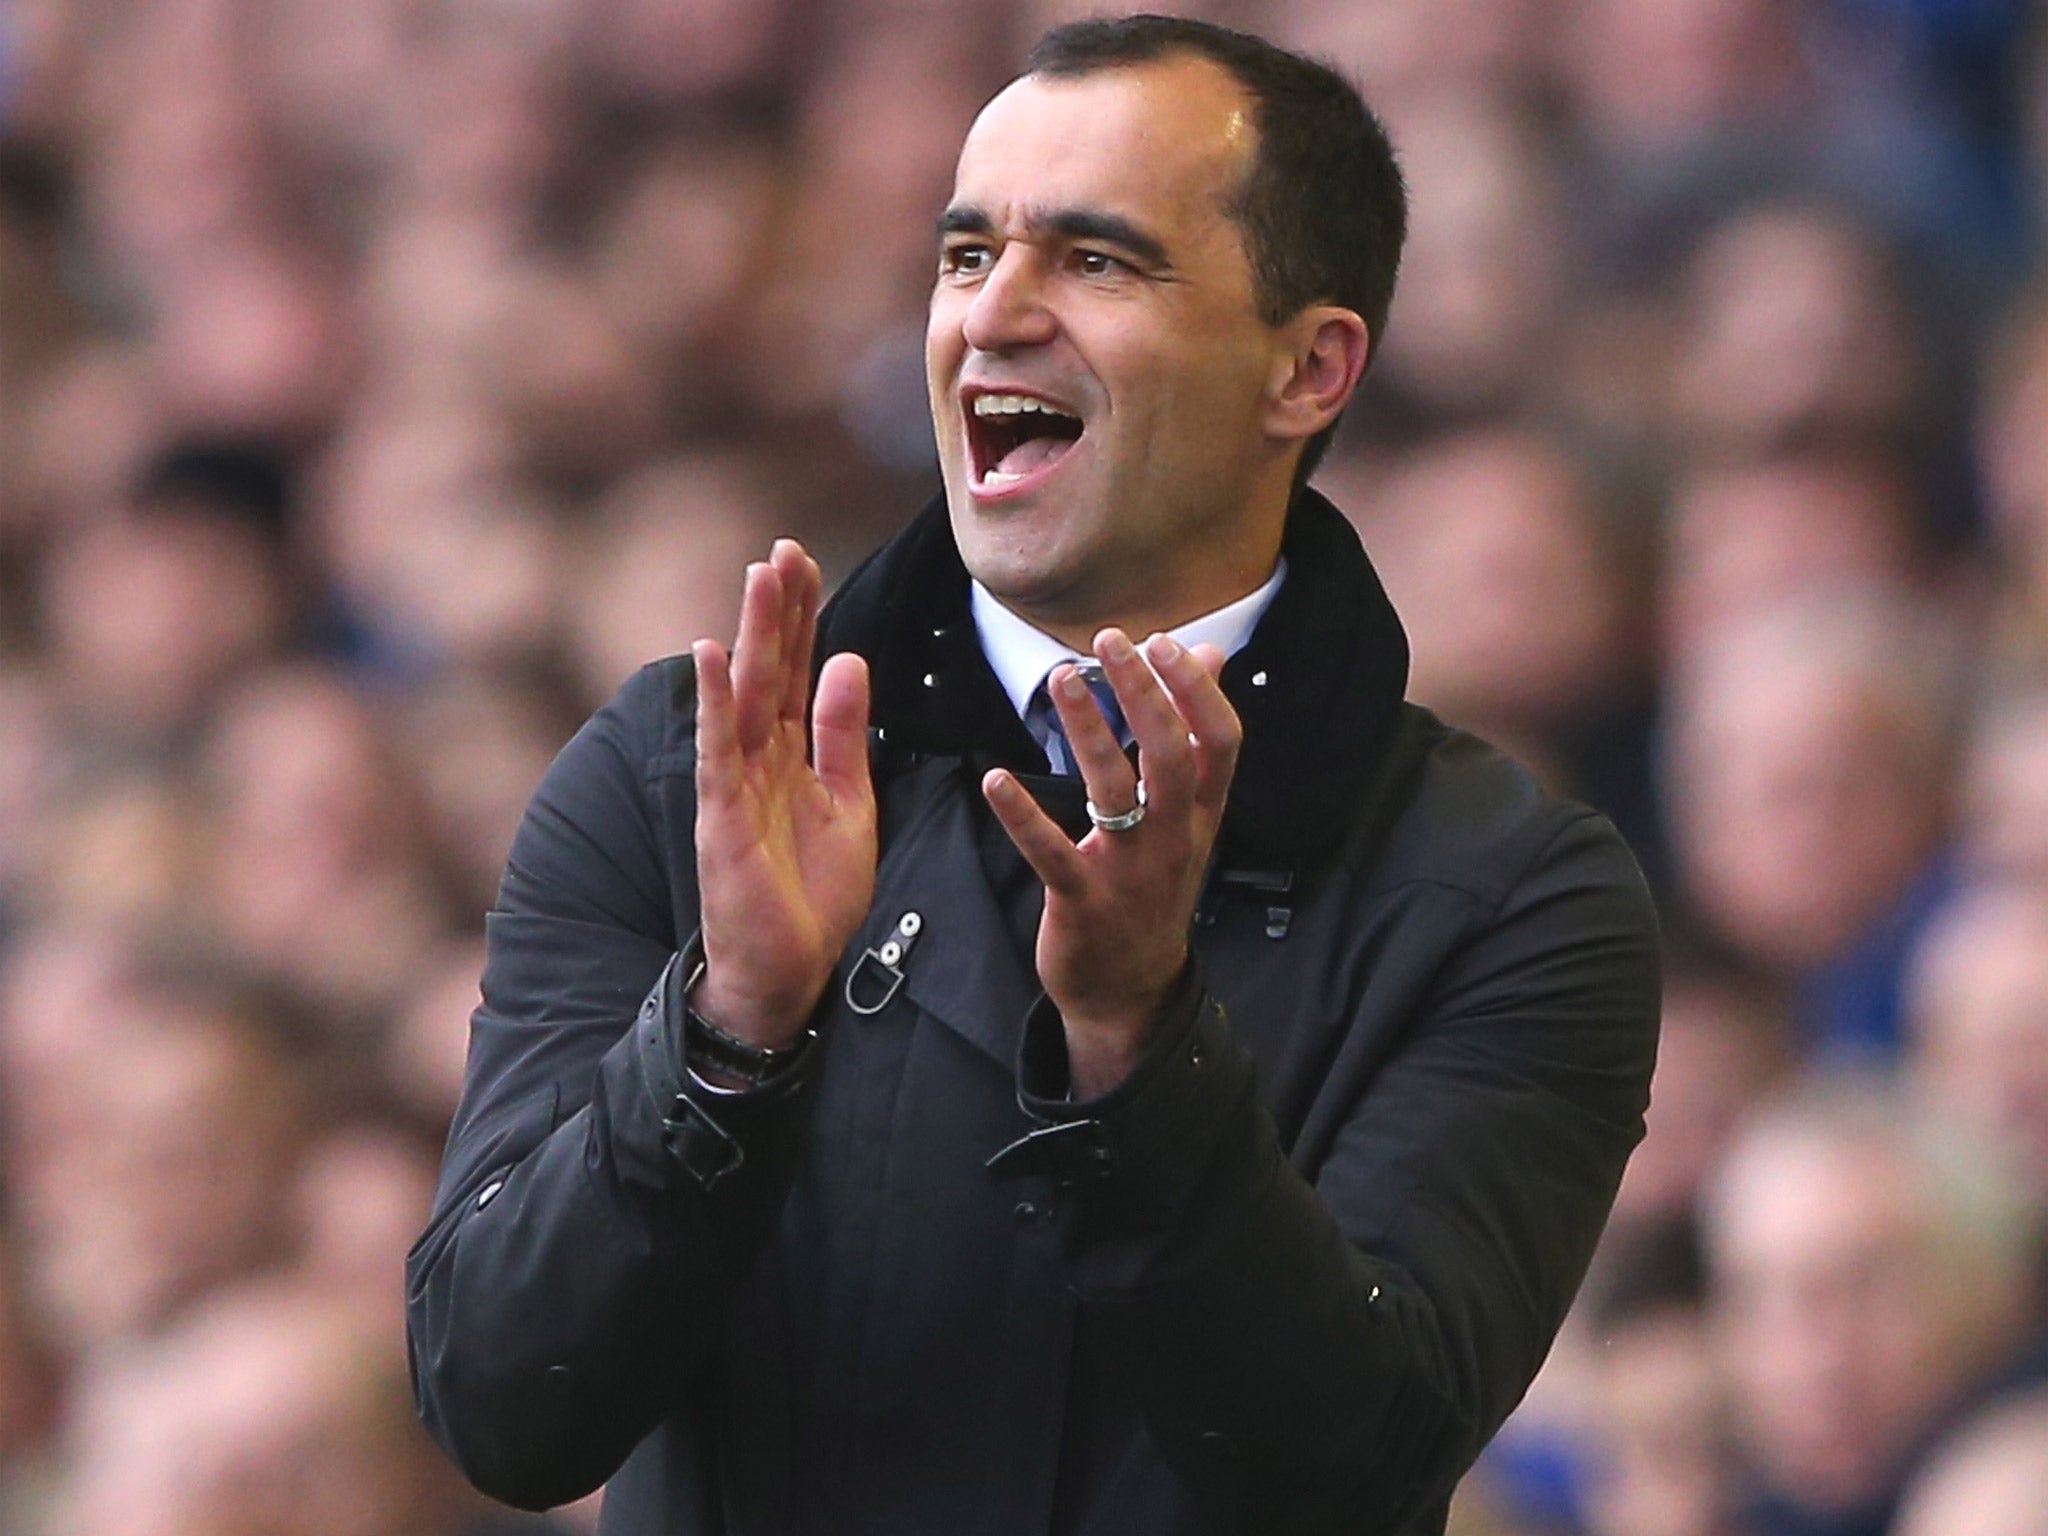 Roberto Martinez makes a gesture on the touchline